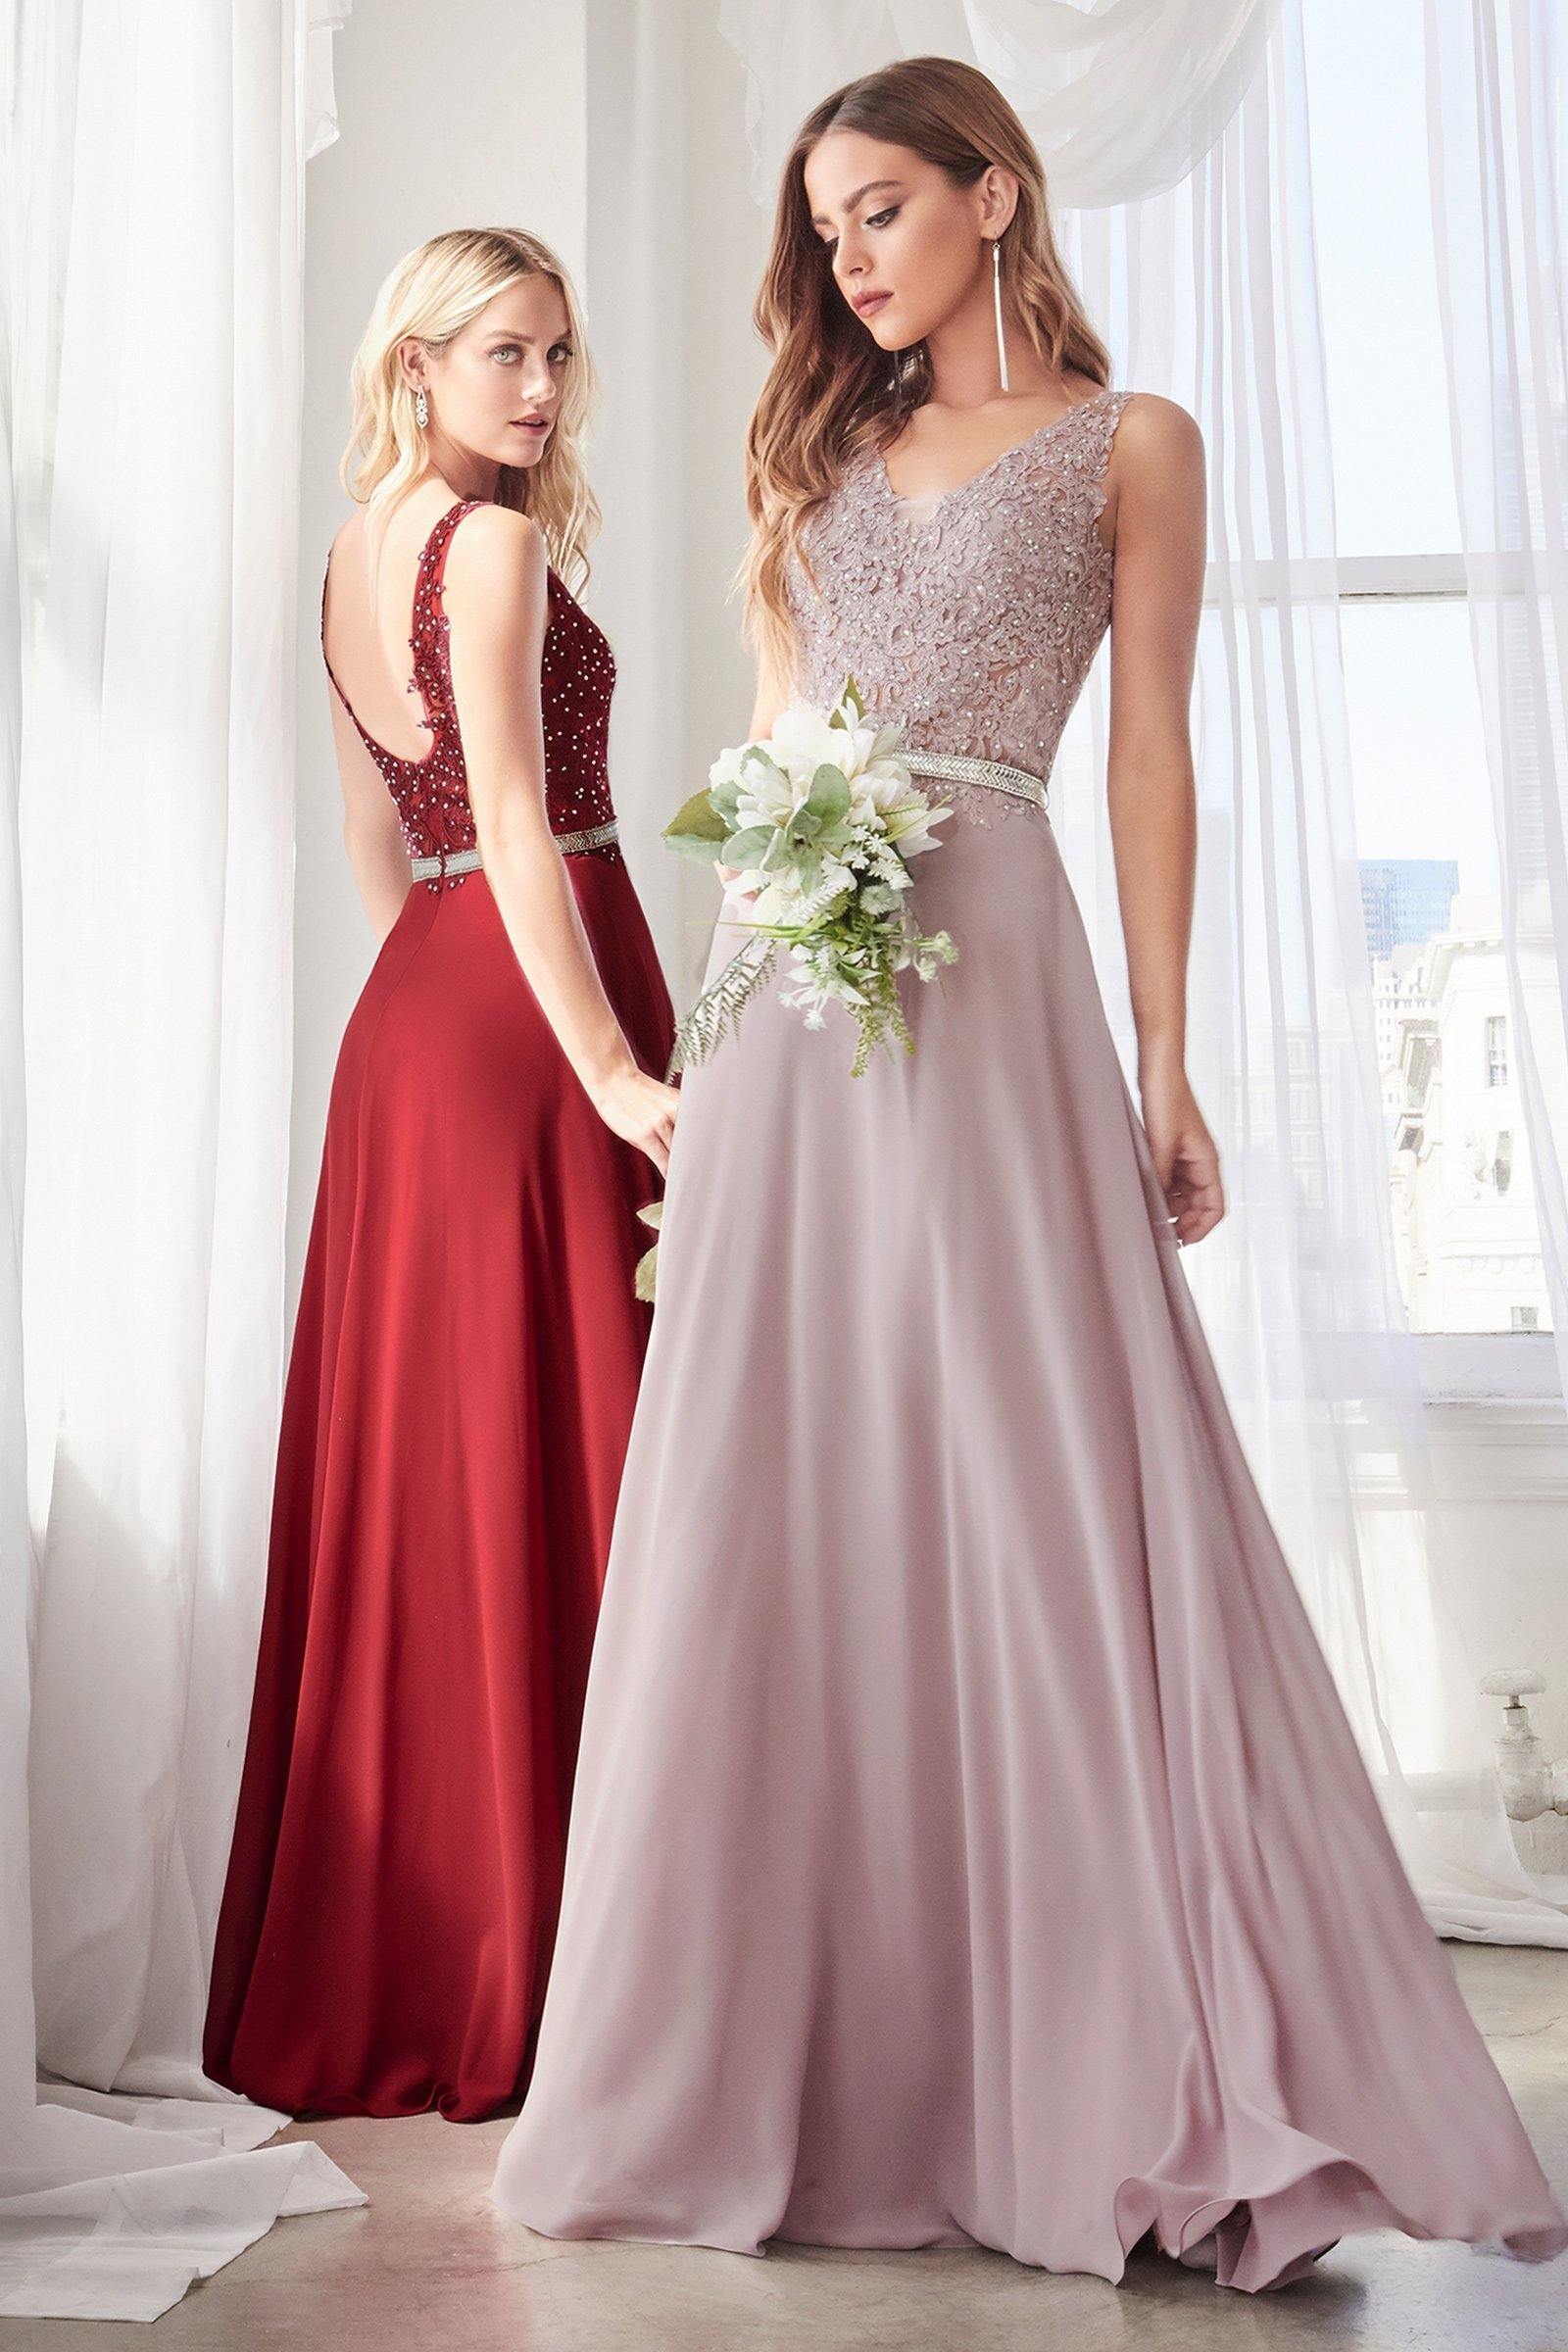 Bridesmaids Long Formal Sleeveless Prom Dress - The Dress Outlet